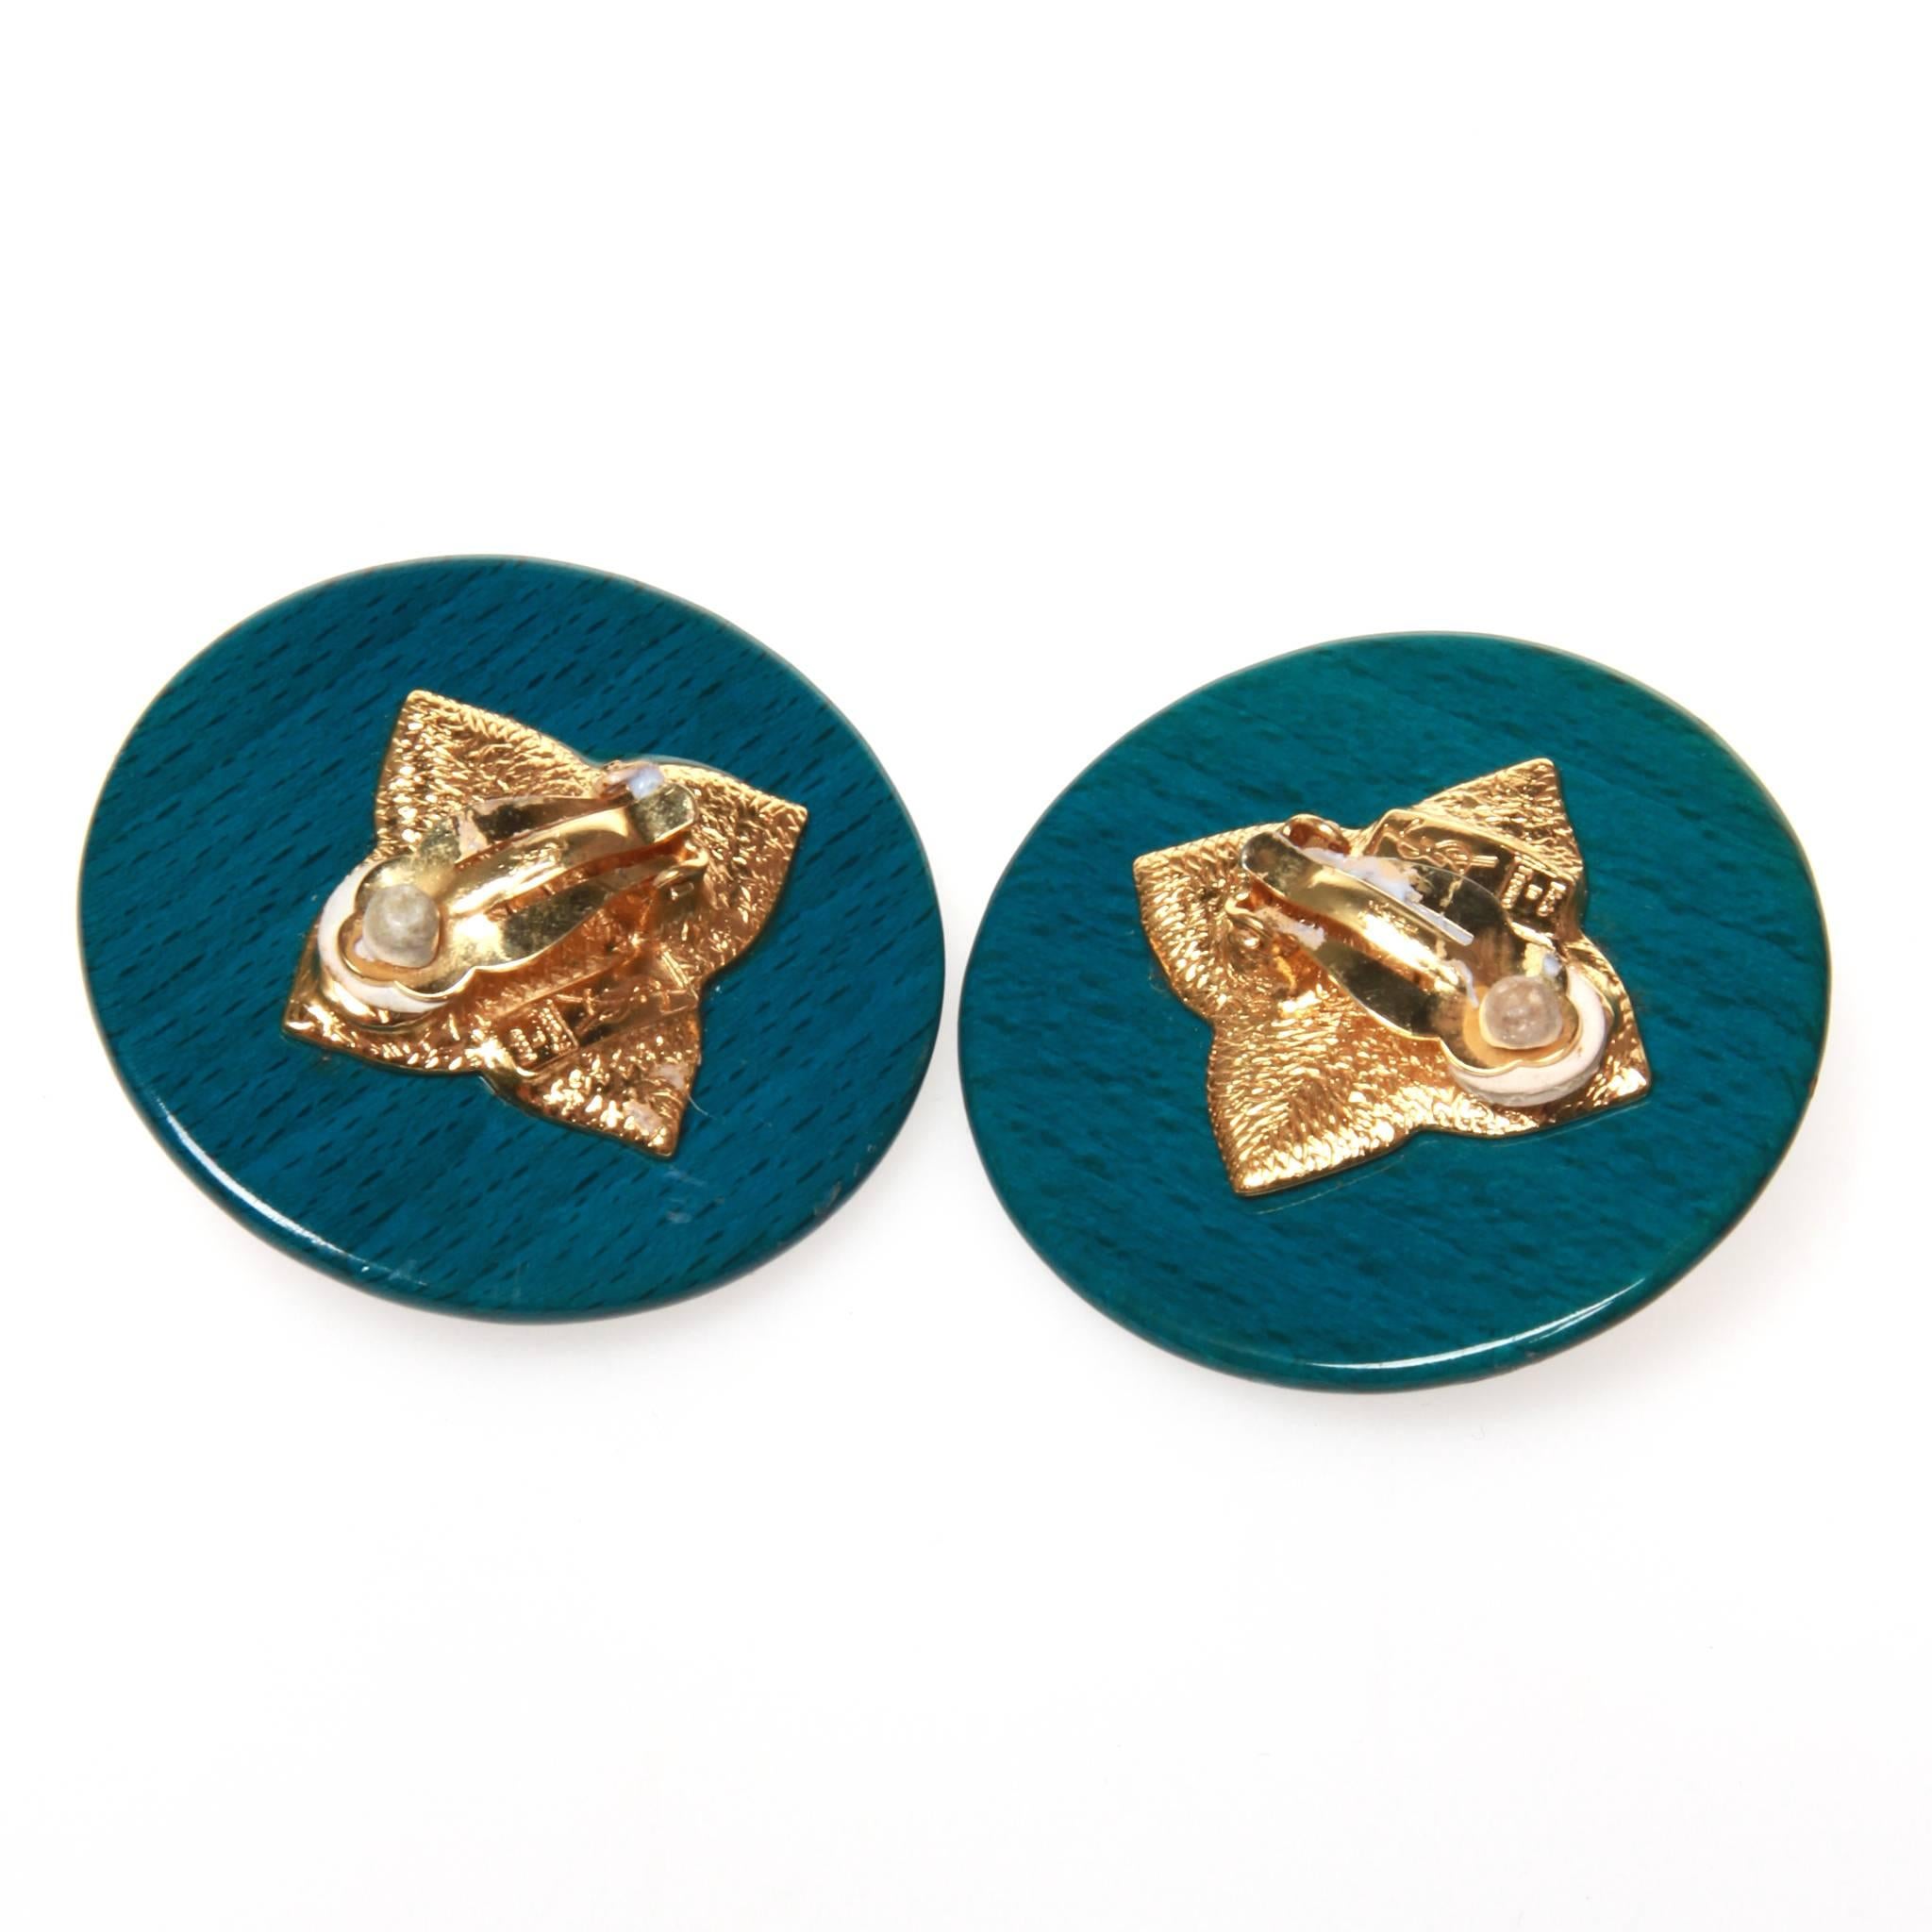 Vintage Yves Saint laurent clip-on earrings featuring a gold-tone metal flower set on a disc of mottled blue resin. YSL stamped at back. 